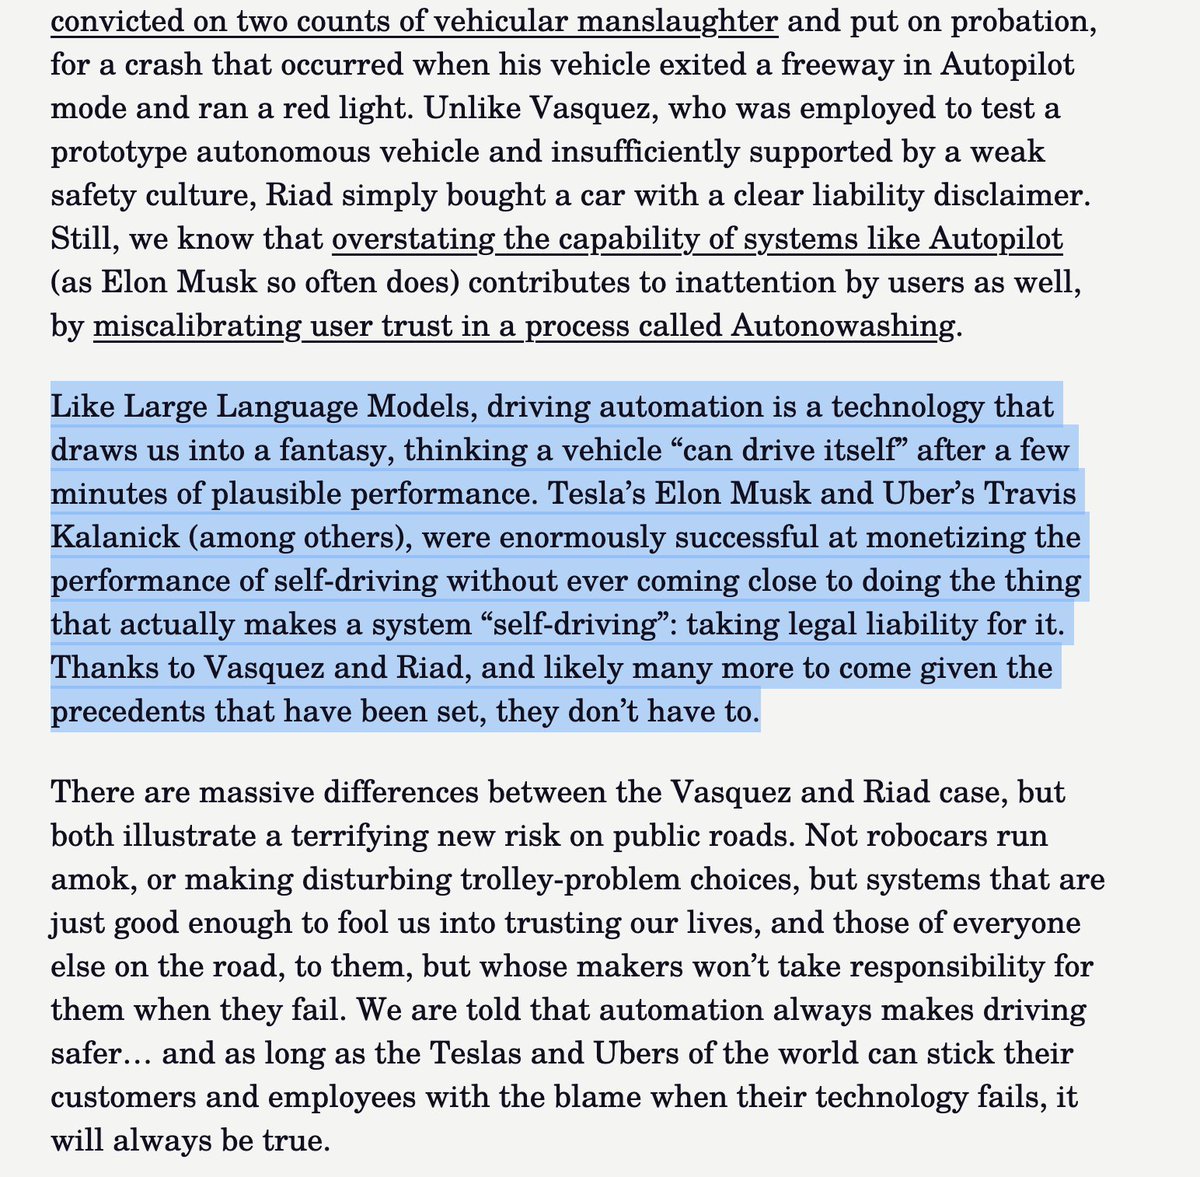 Thank you. I'd like to highlight my fav part: 'Like Large Language Models, driving automation is a technology that draws us into a fantasy, thinking a vehicle “can drive itself” after a few minutes of plausible performance.' ⚡️⚡️⚡️